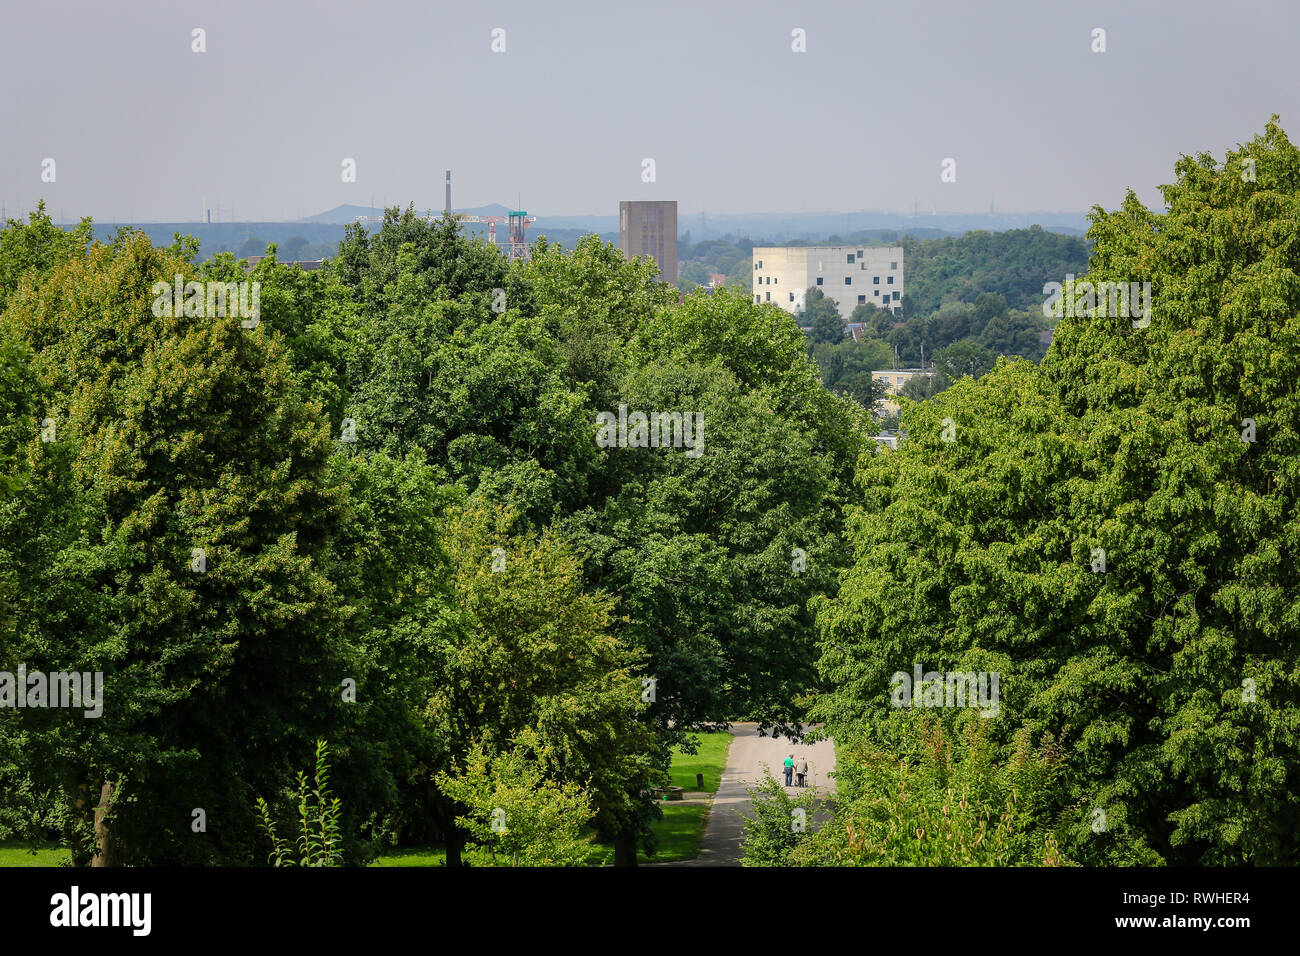 Essen, North Rhine-Westphalia, Ruhr area, Germany - The Hallopark between Stoppenberg and Schonnebeck is one of the oldest green areas in Essen. View  Stock Photo